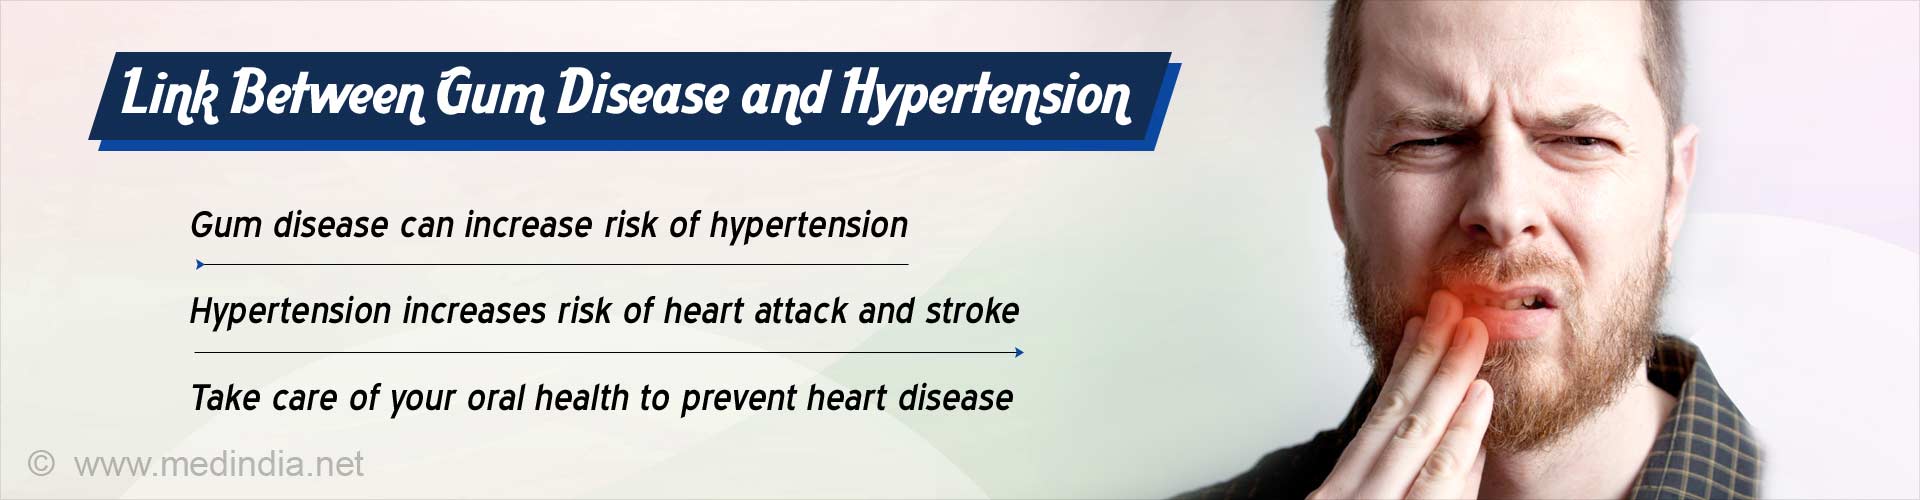 Link between gum disease and hypertension. Gum disease can increase risk of hypertension. Hypertension increases risk of heart attack and stroke. Take care of your oral health to prevent heart disease.